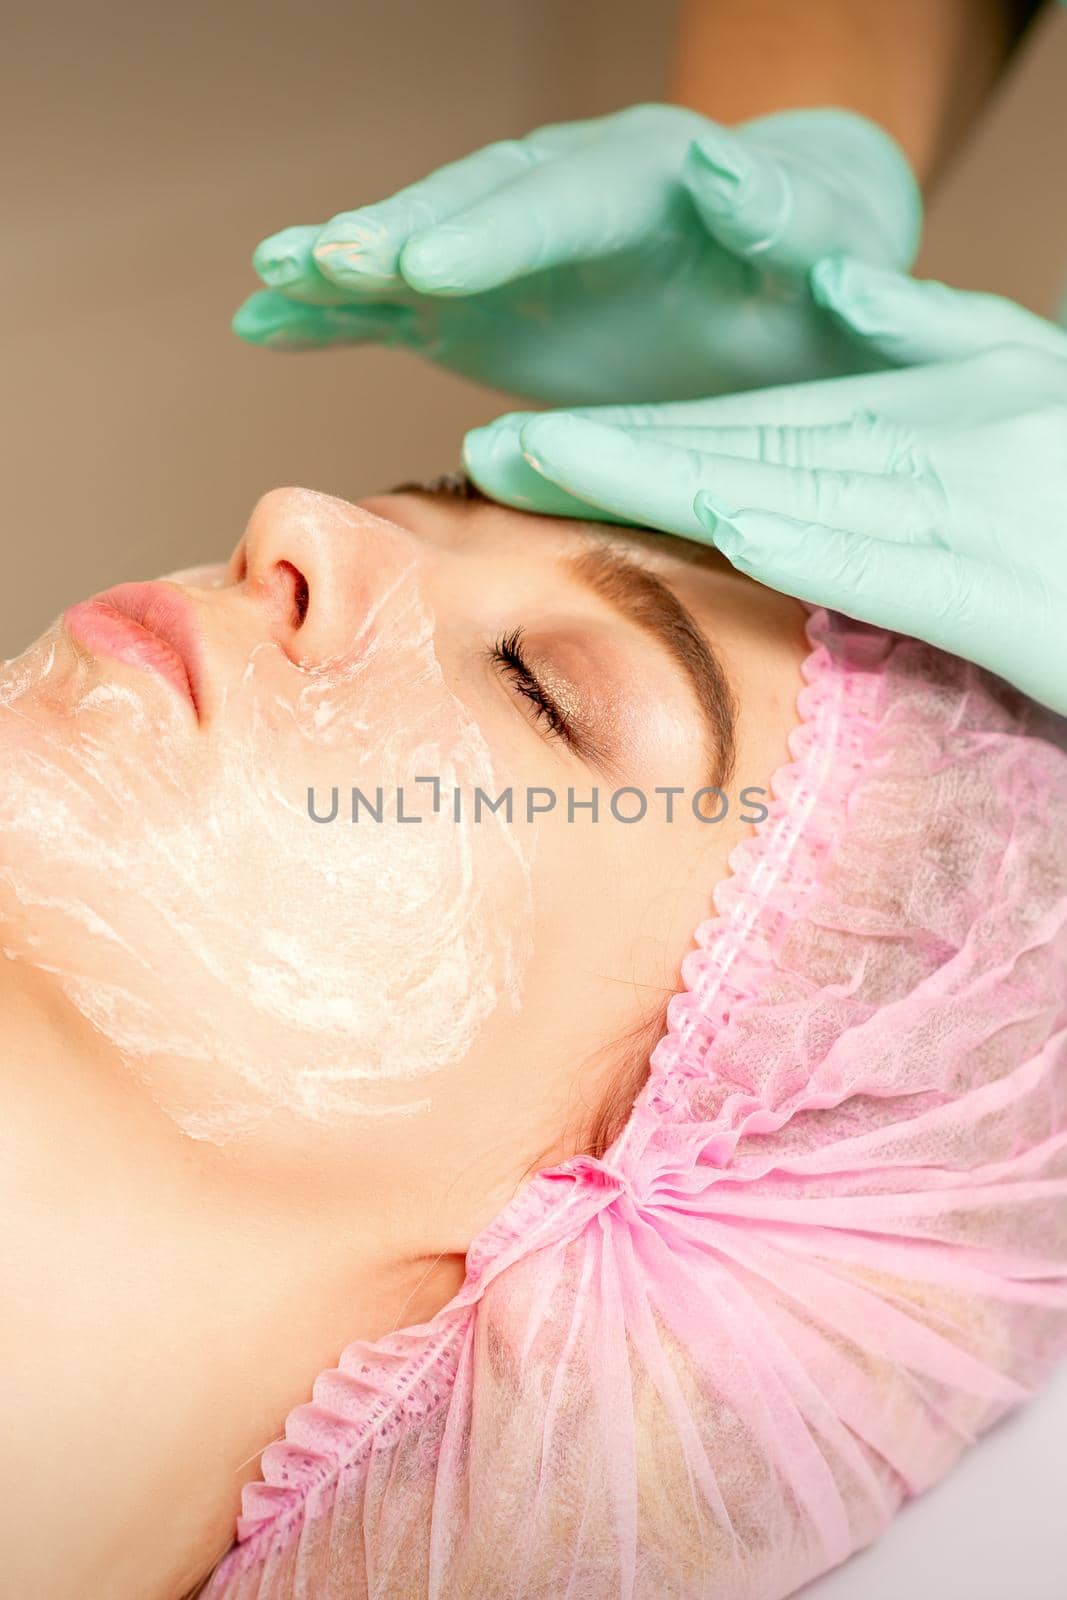 Face peeling at the beautician. Facial treatment. The beautician applies a cleansing face mask to the female patient